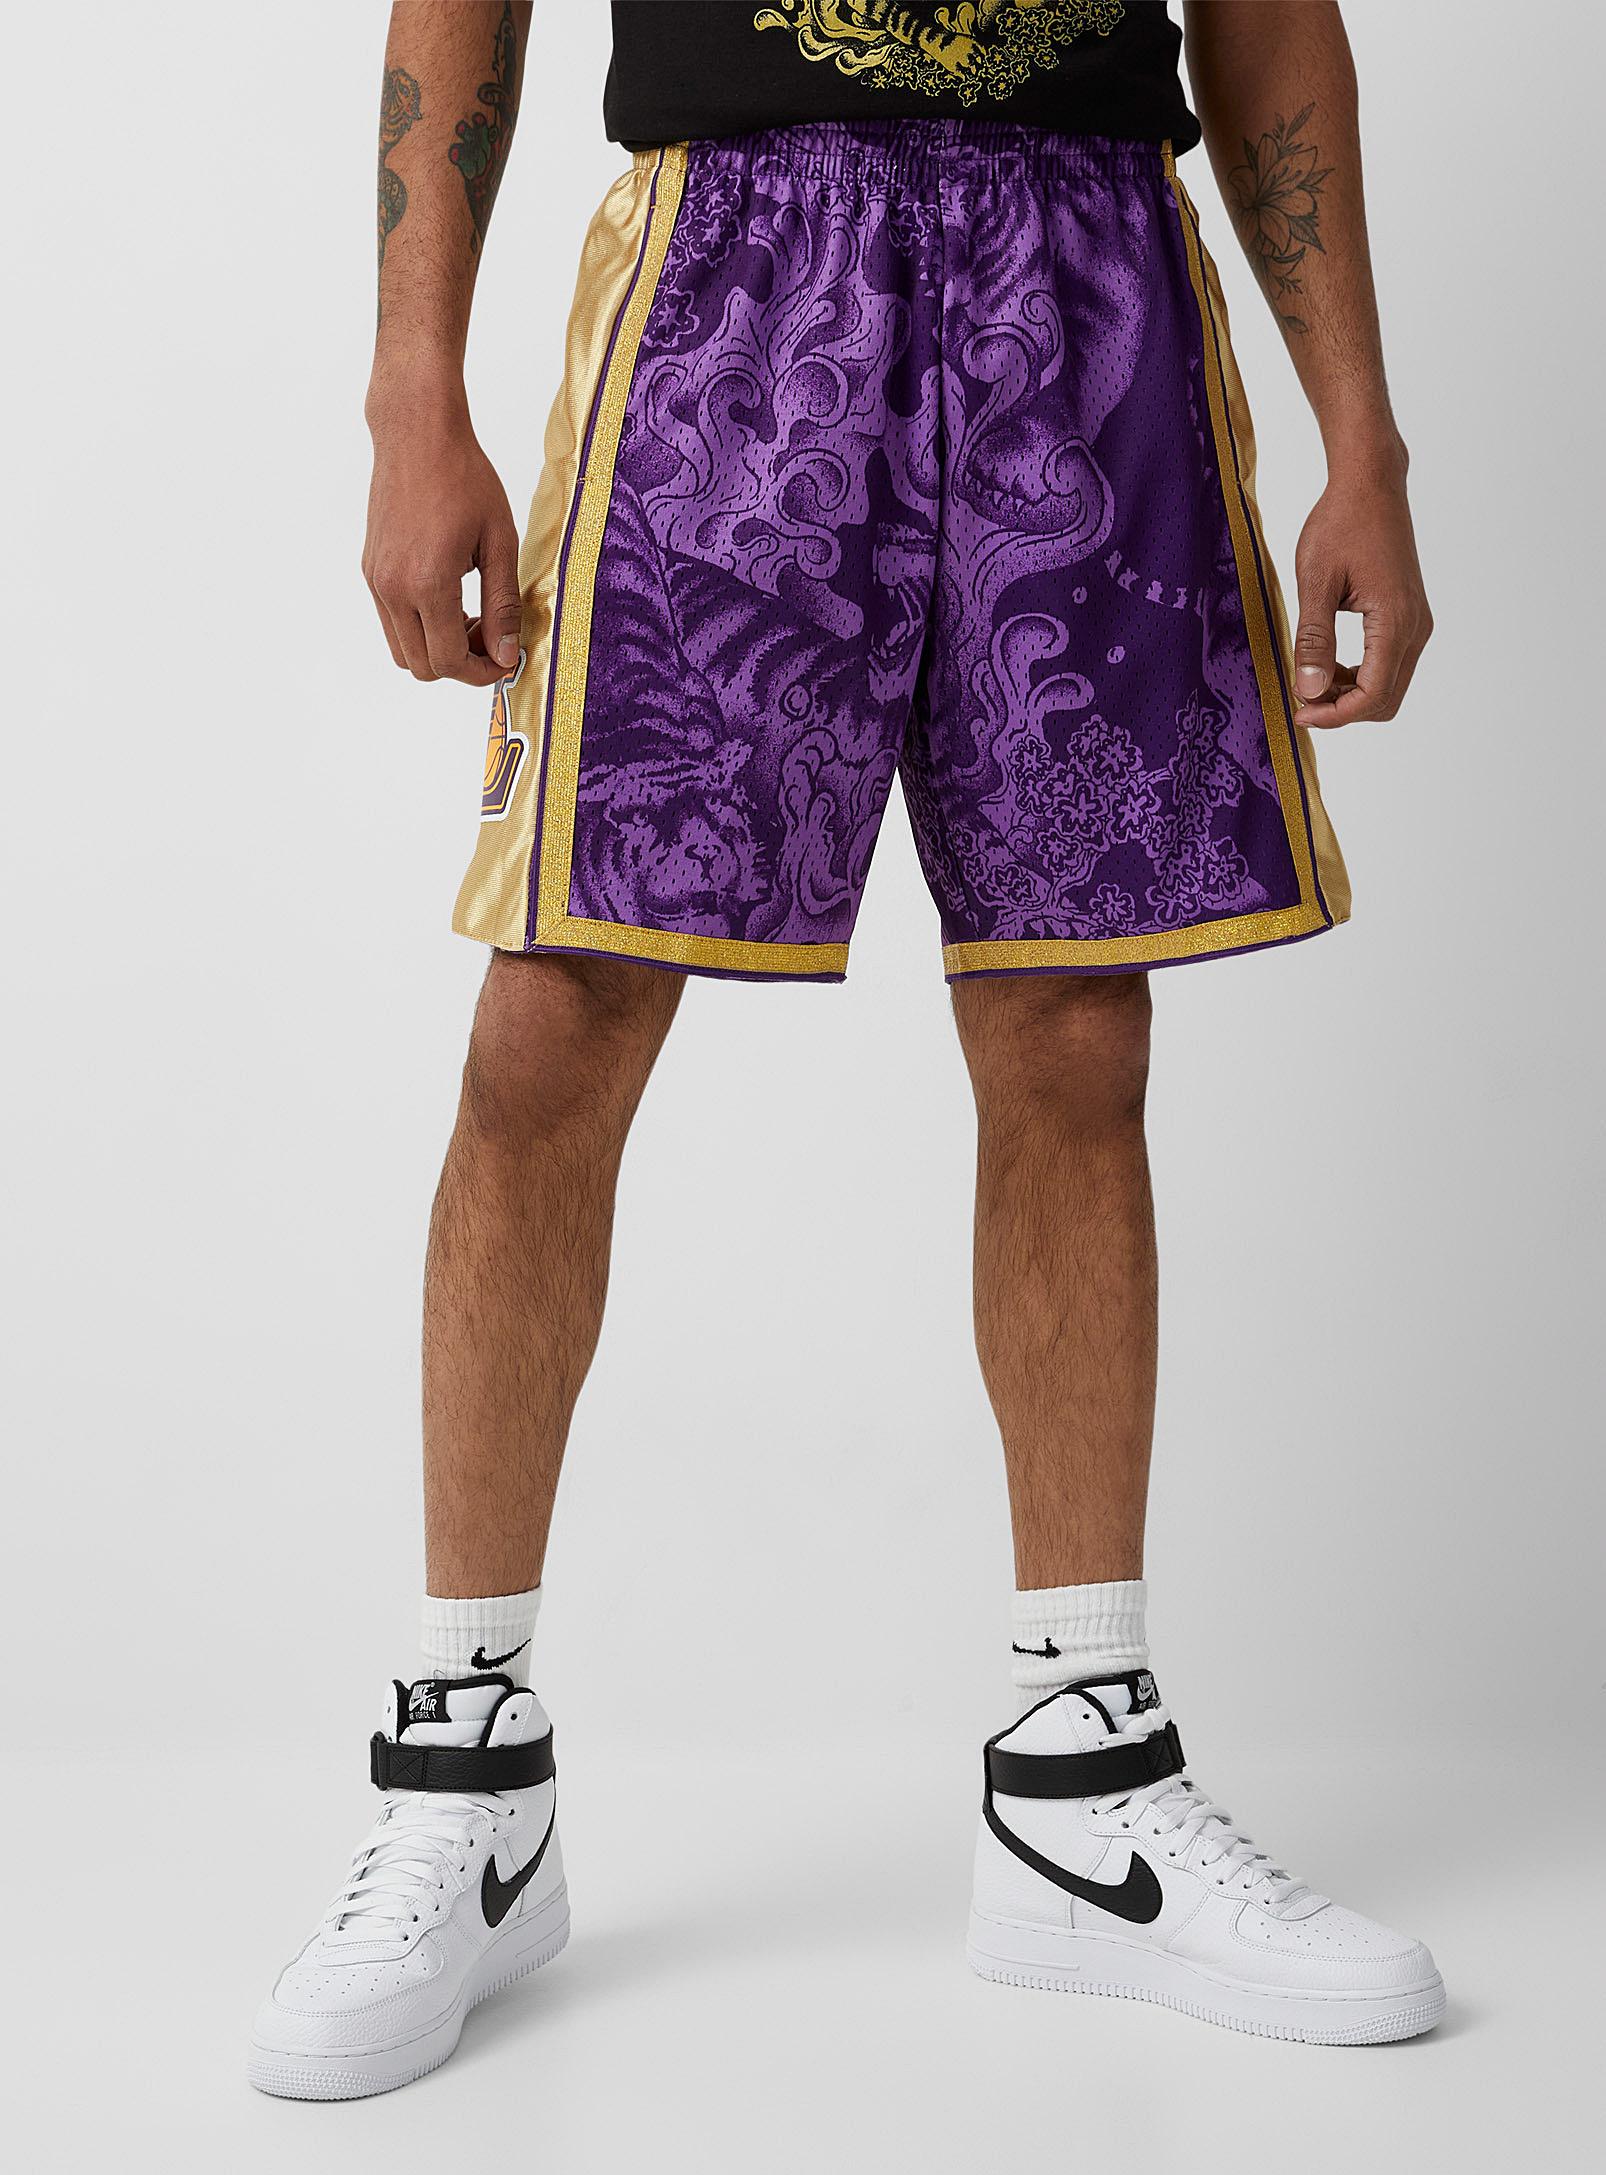 mitchell and ness lakers short